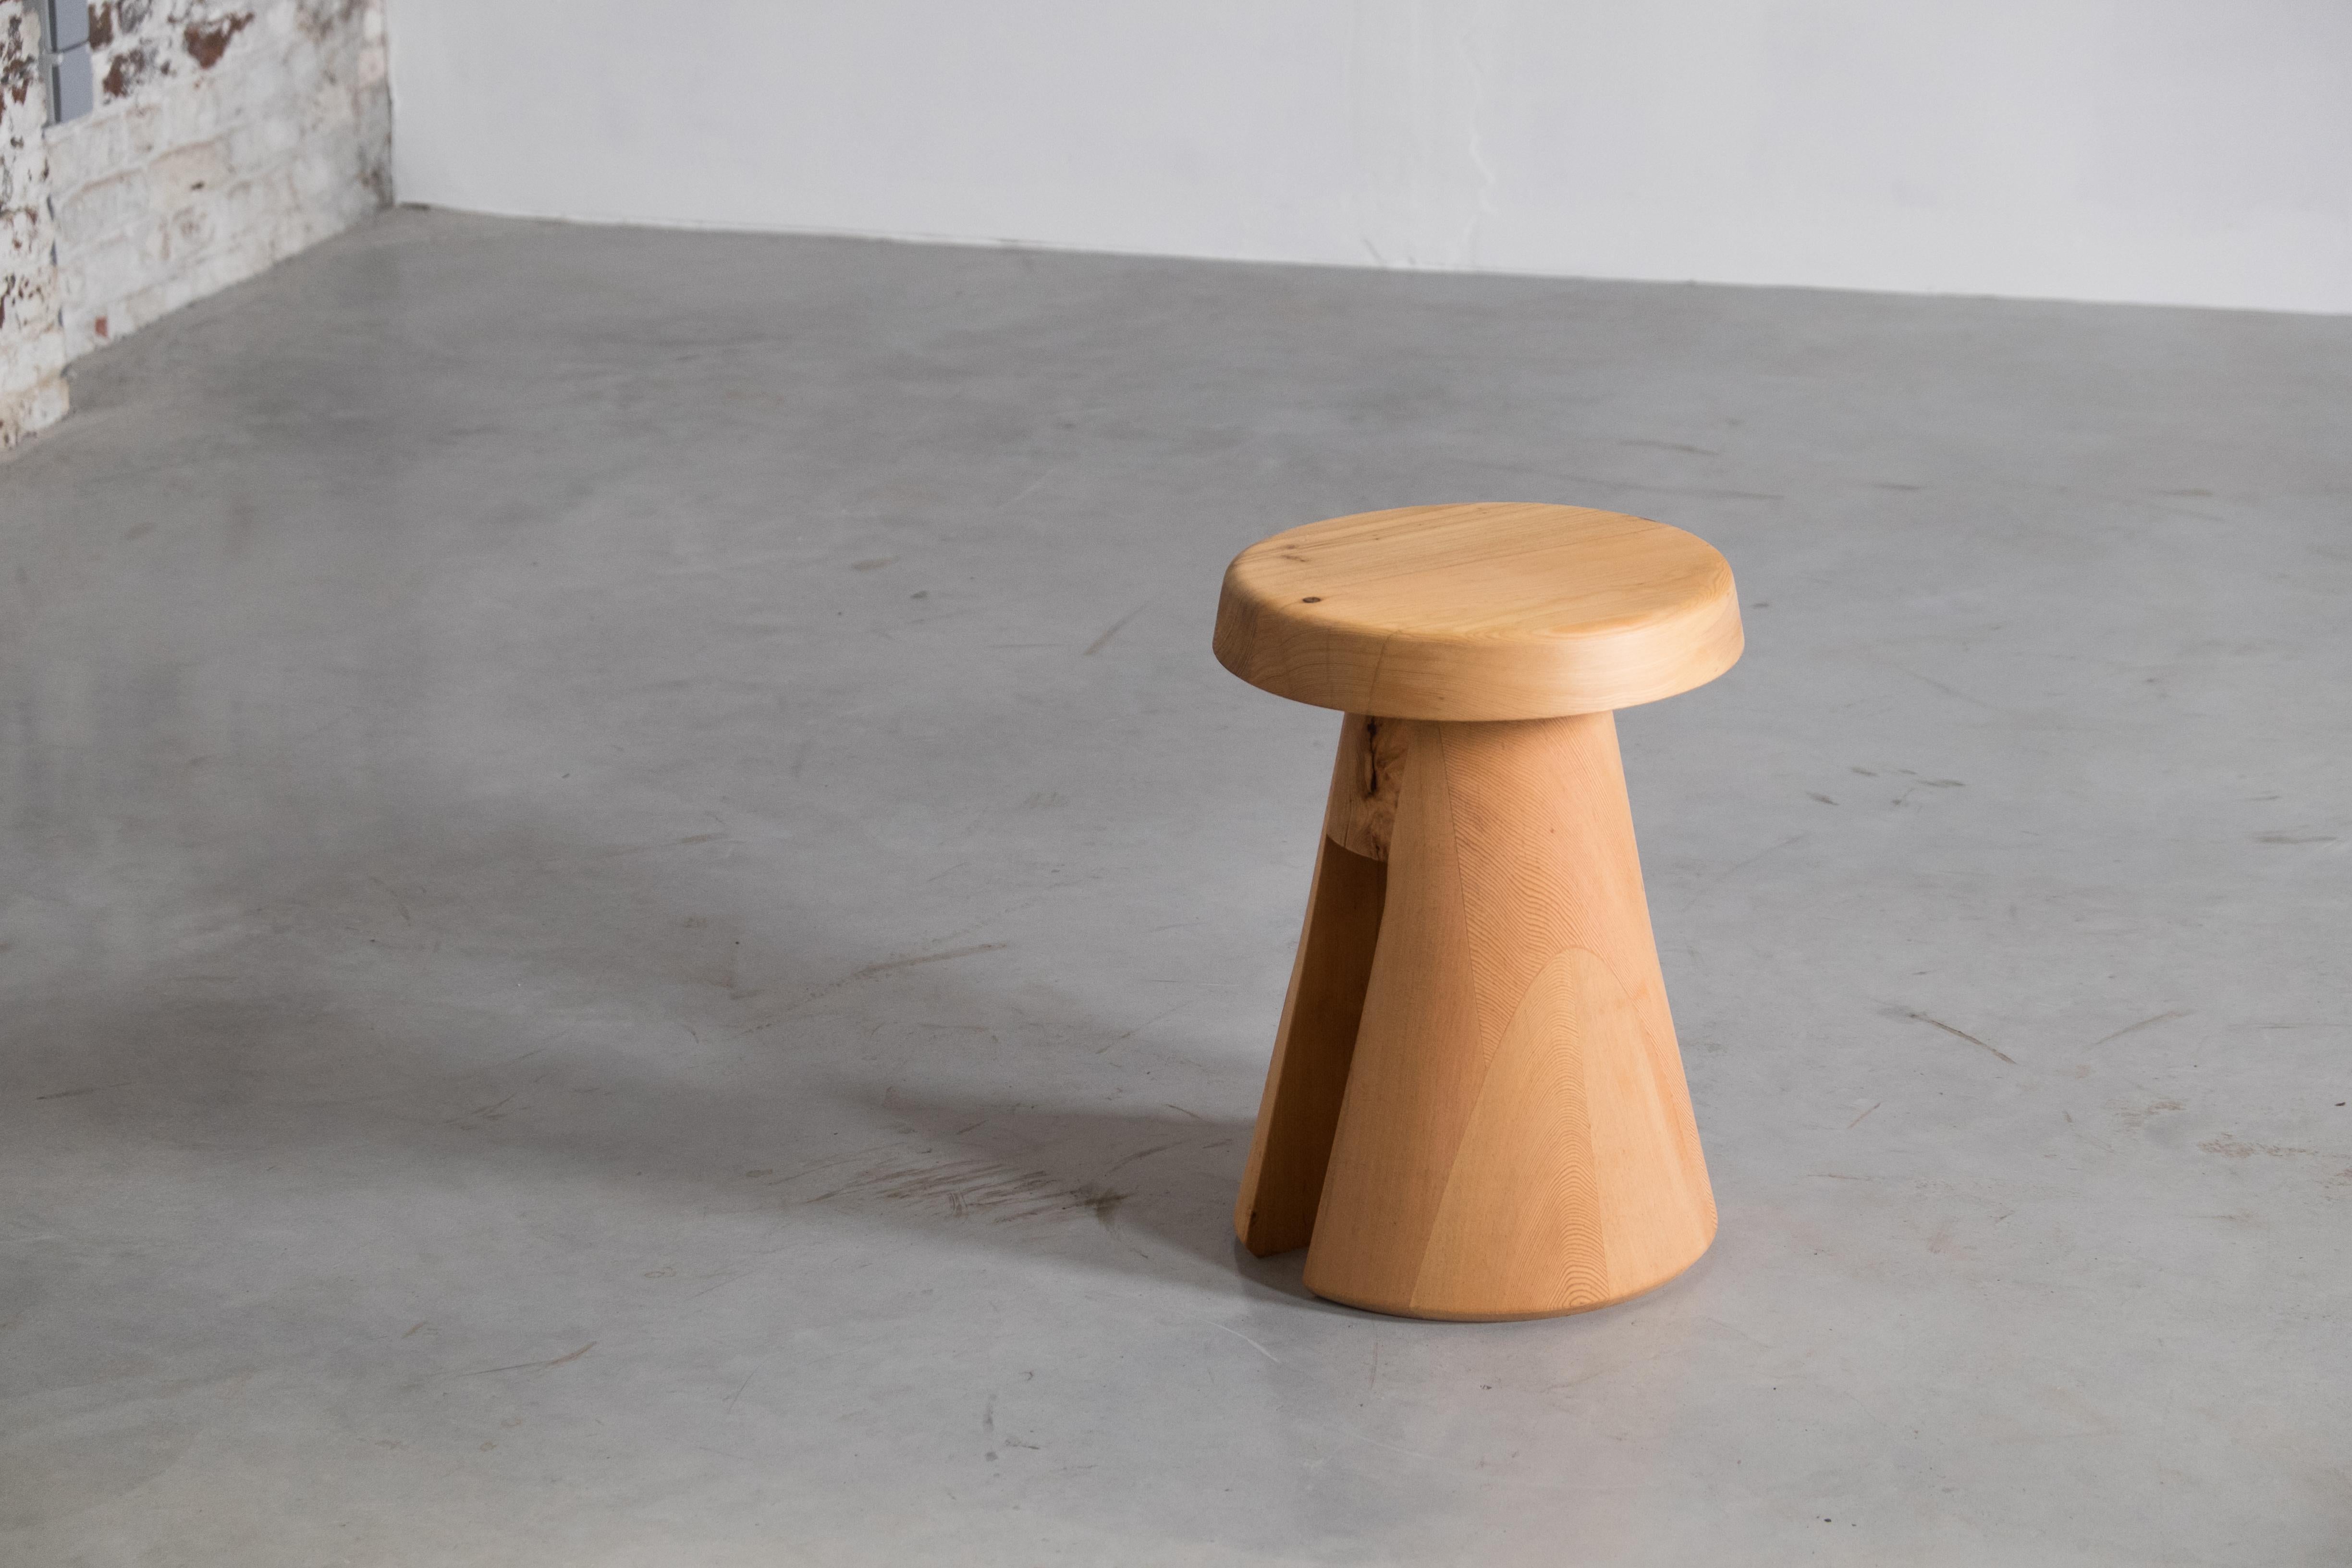 Wood Data Stool in Solid Oregon by Atelier Thomas Serruys